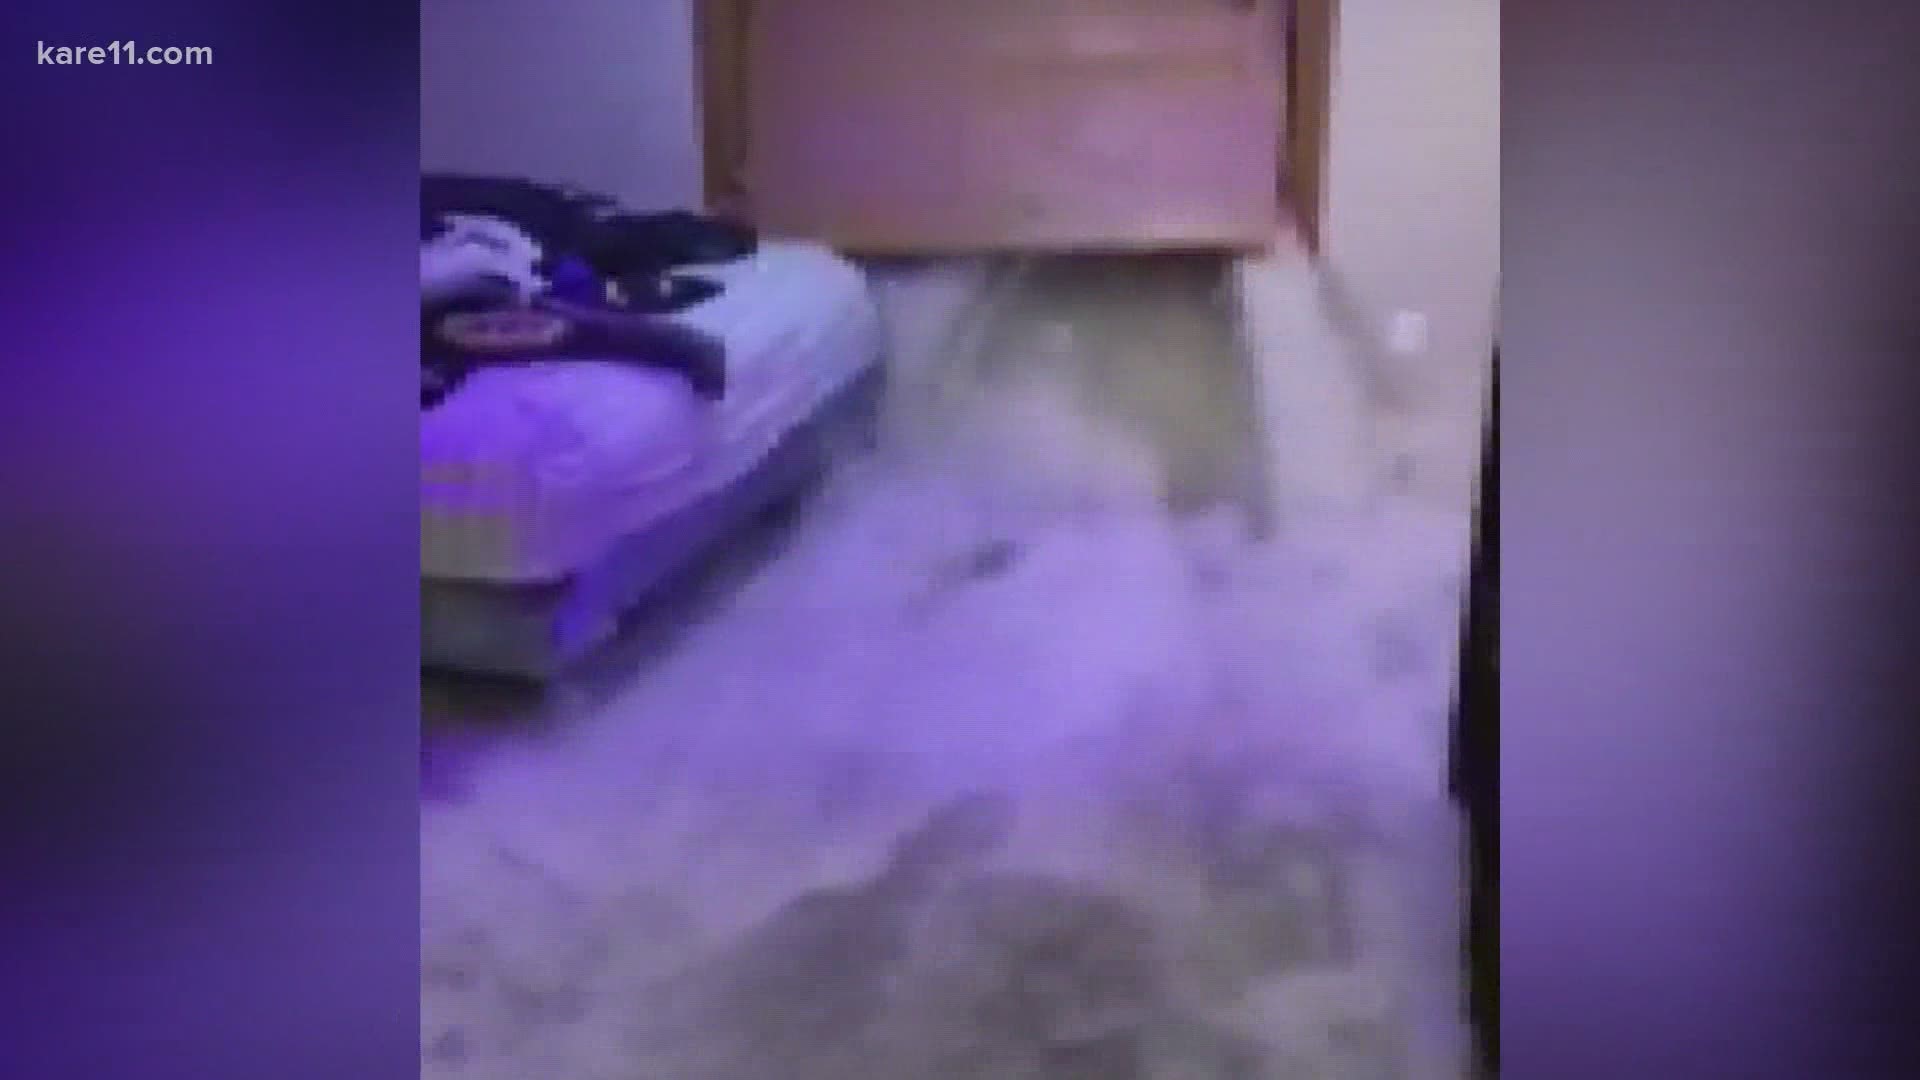 Earlier this week, there was a real scare for a western Wisconsin family who had to run out of their flooding basement when rushing waters broke through a window